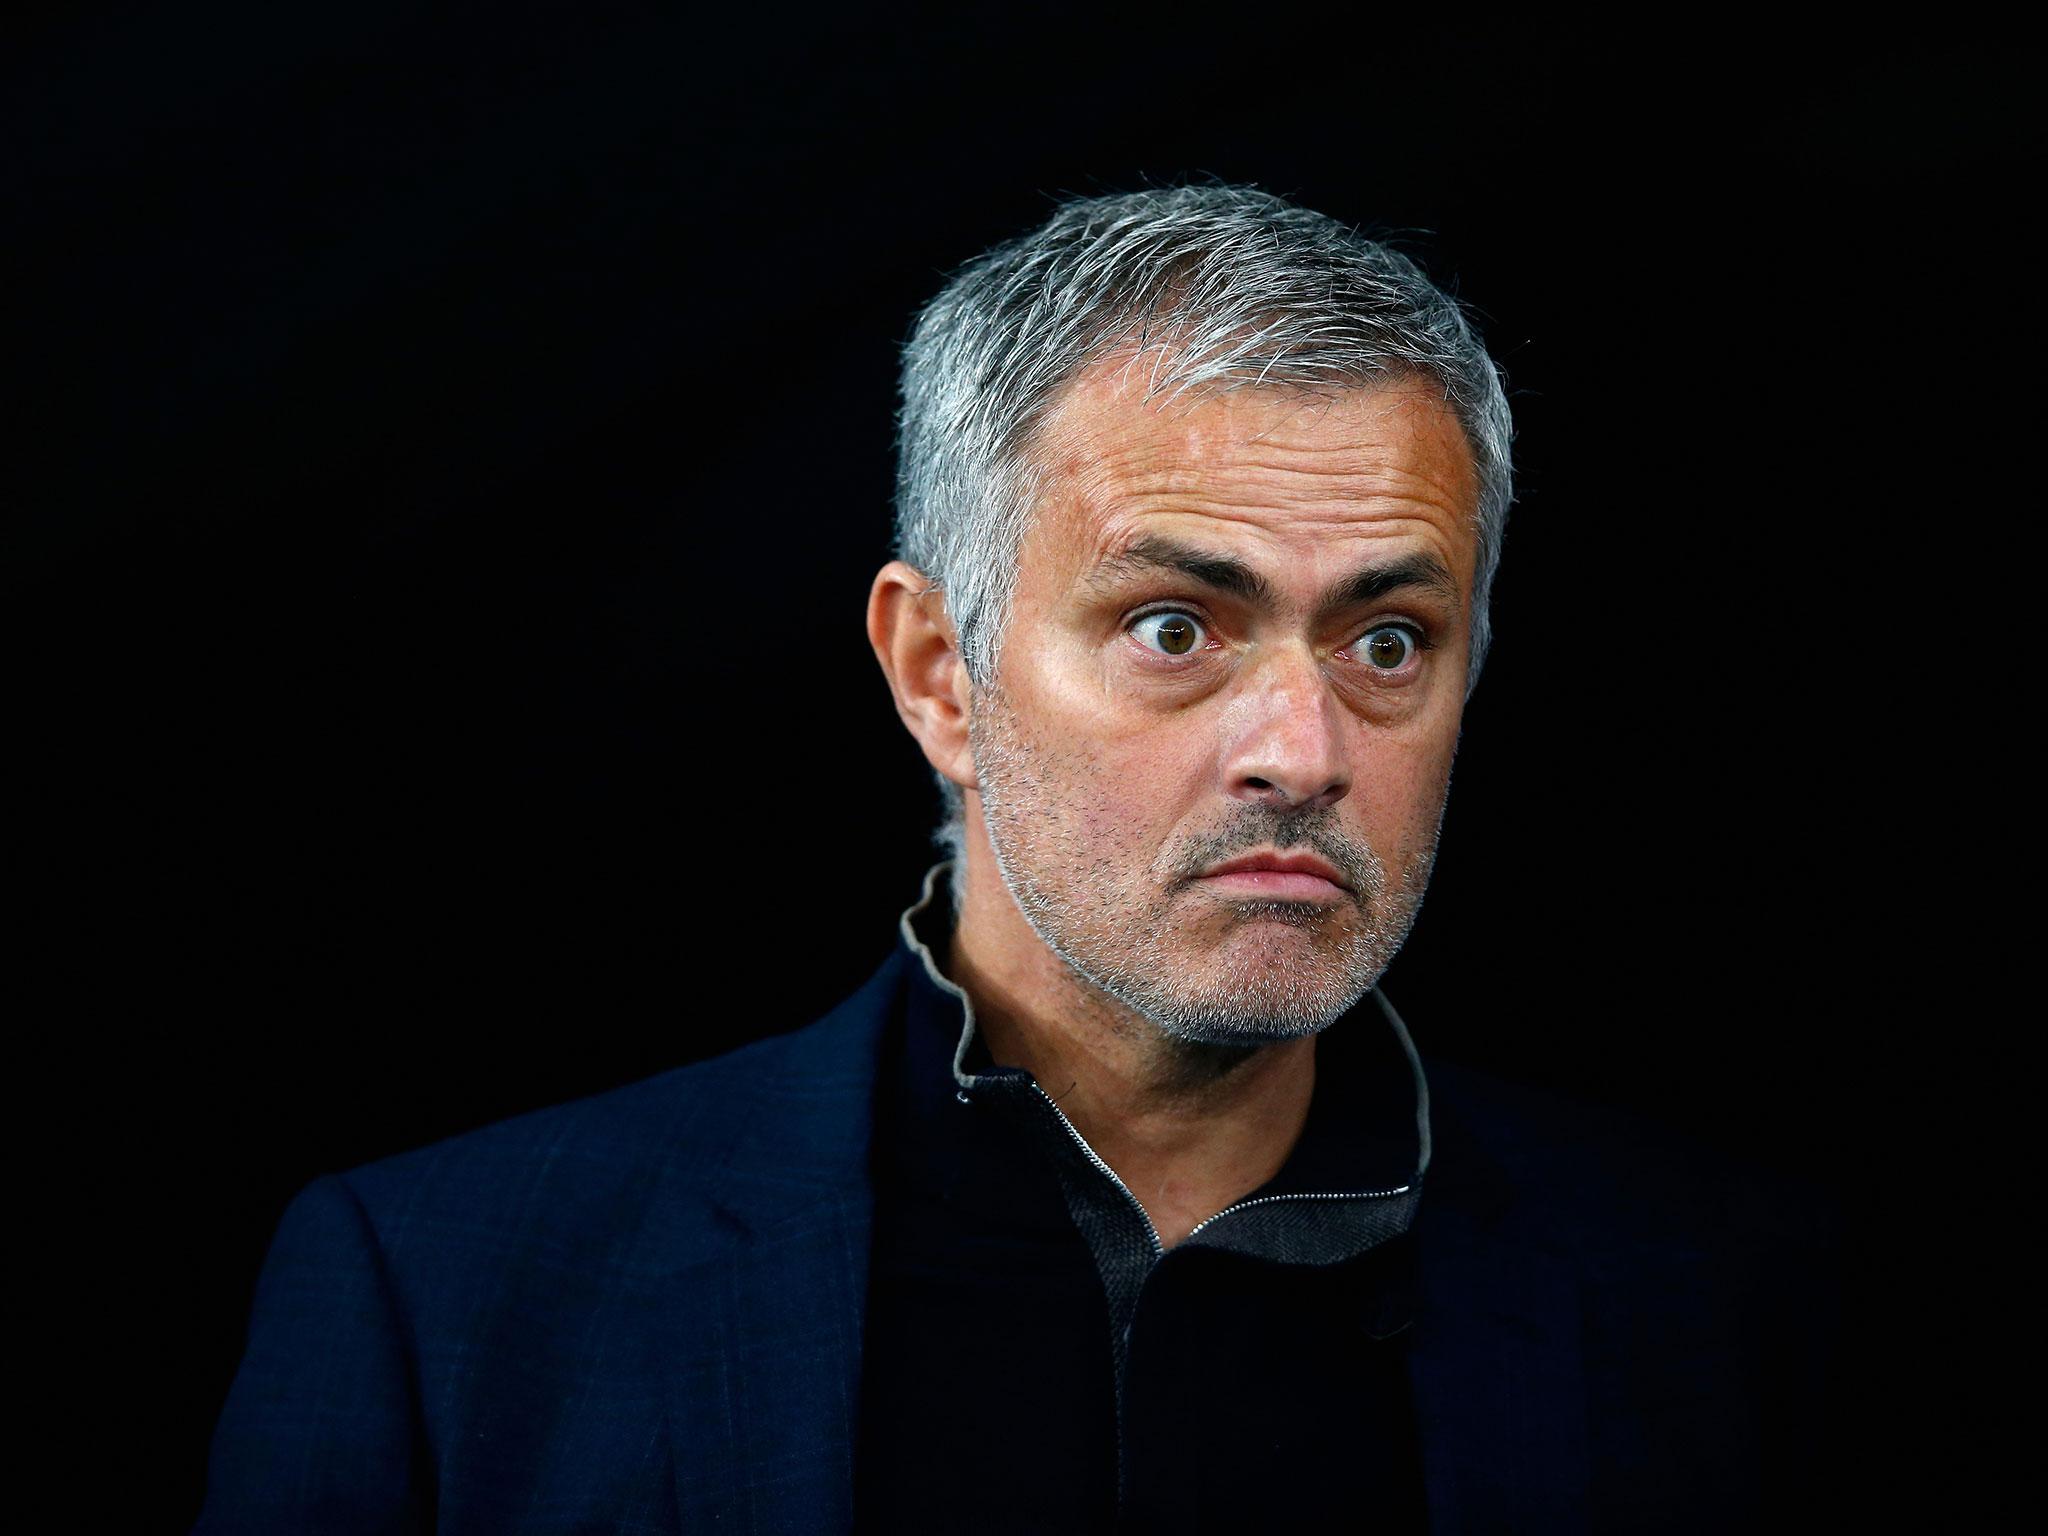 Fifa asked Mourinho to name the best XI players he has coached in his career